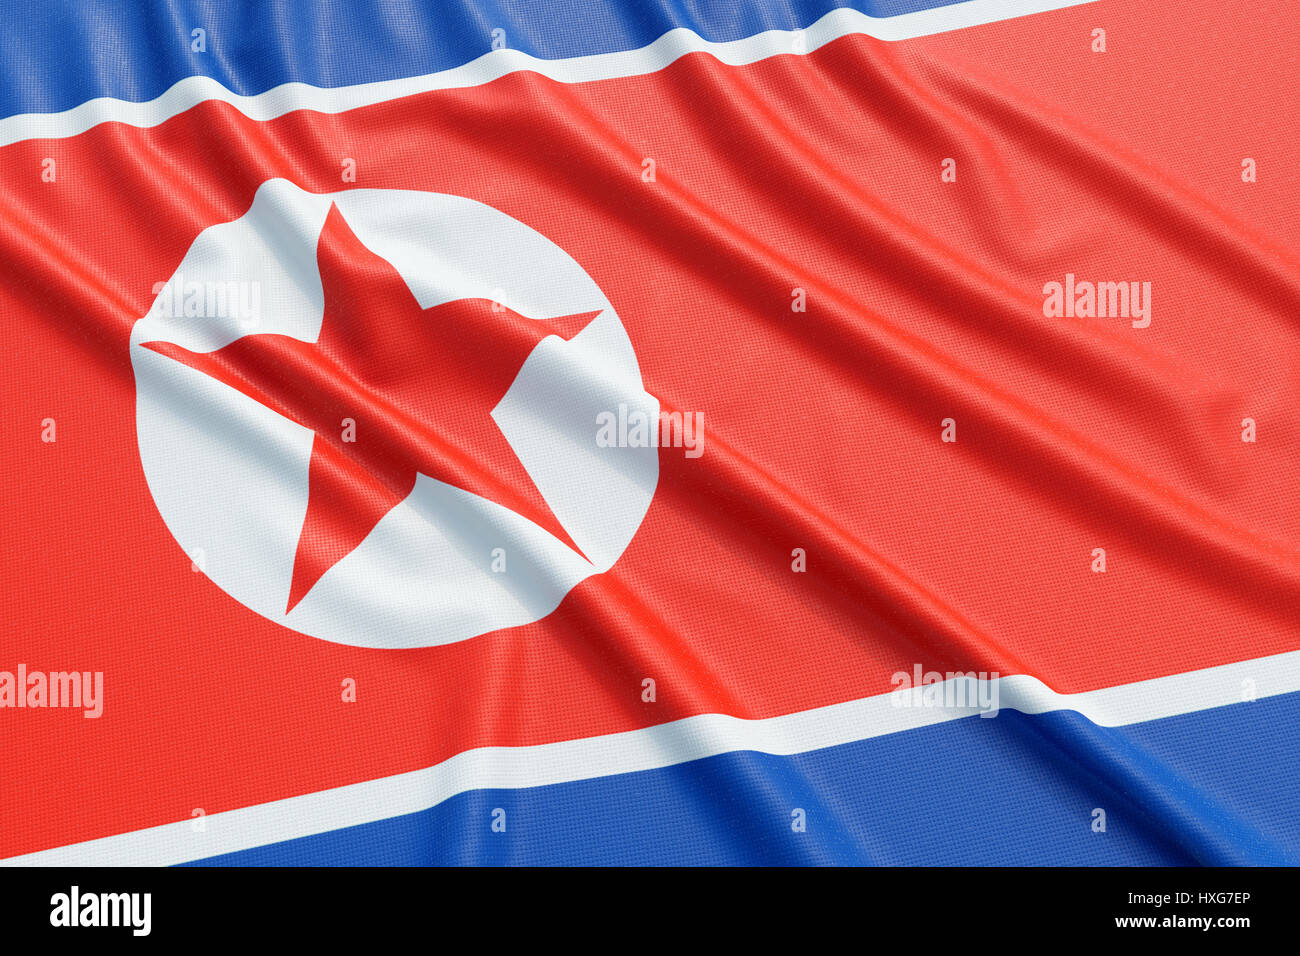 North Korea flag. Wavy fabric high detailed texture. 3d illustration rendering Stock Photo